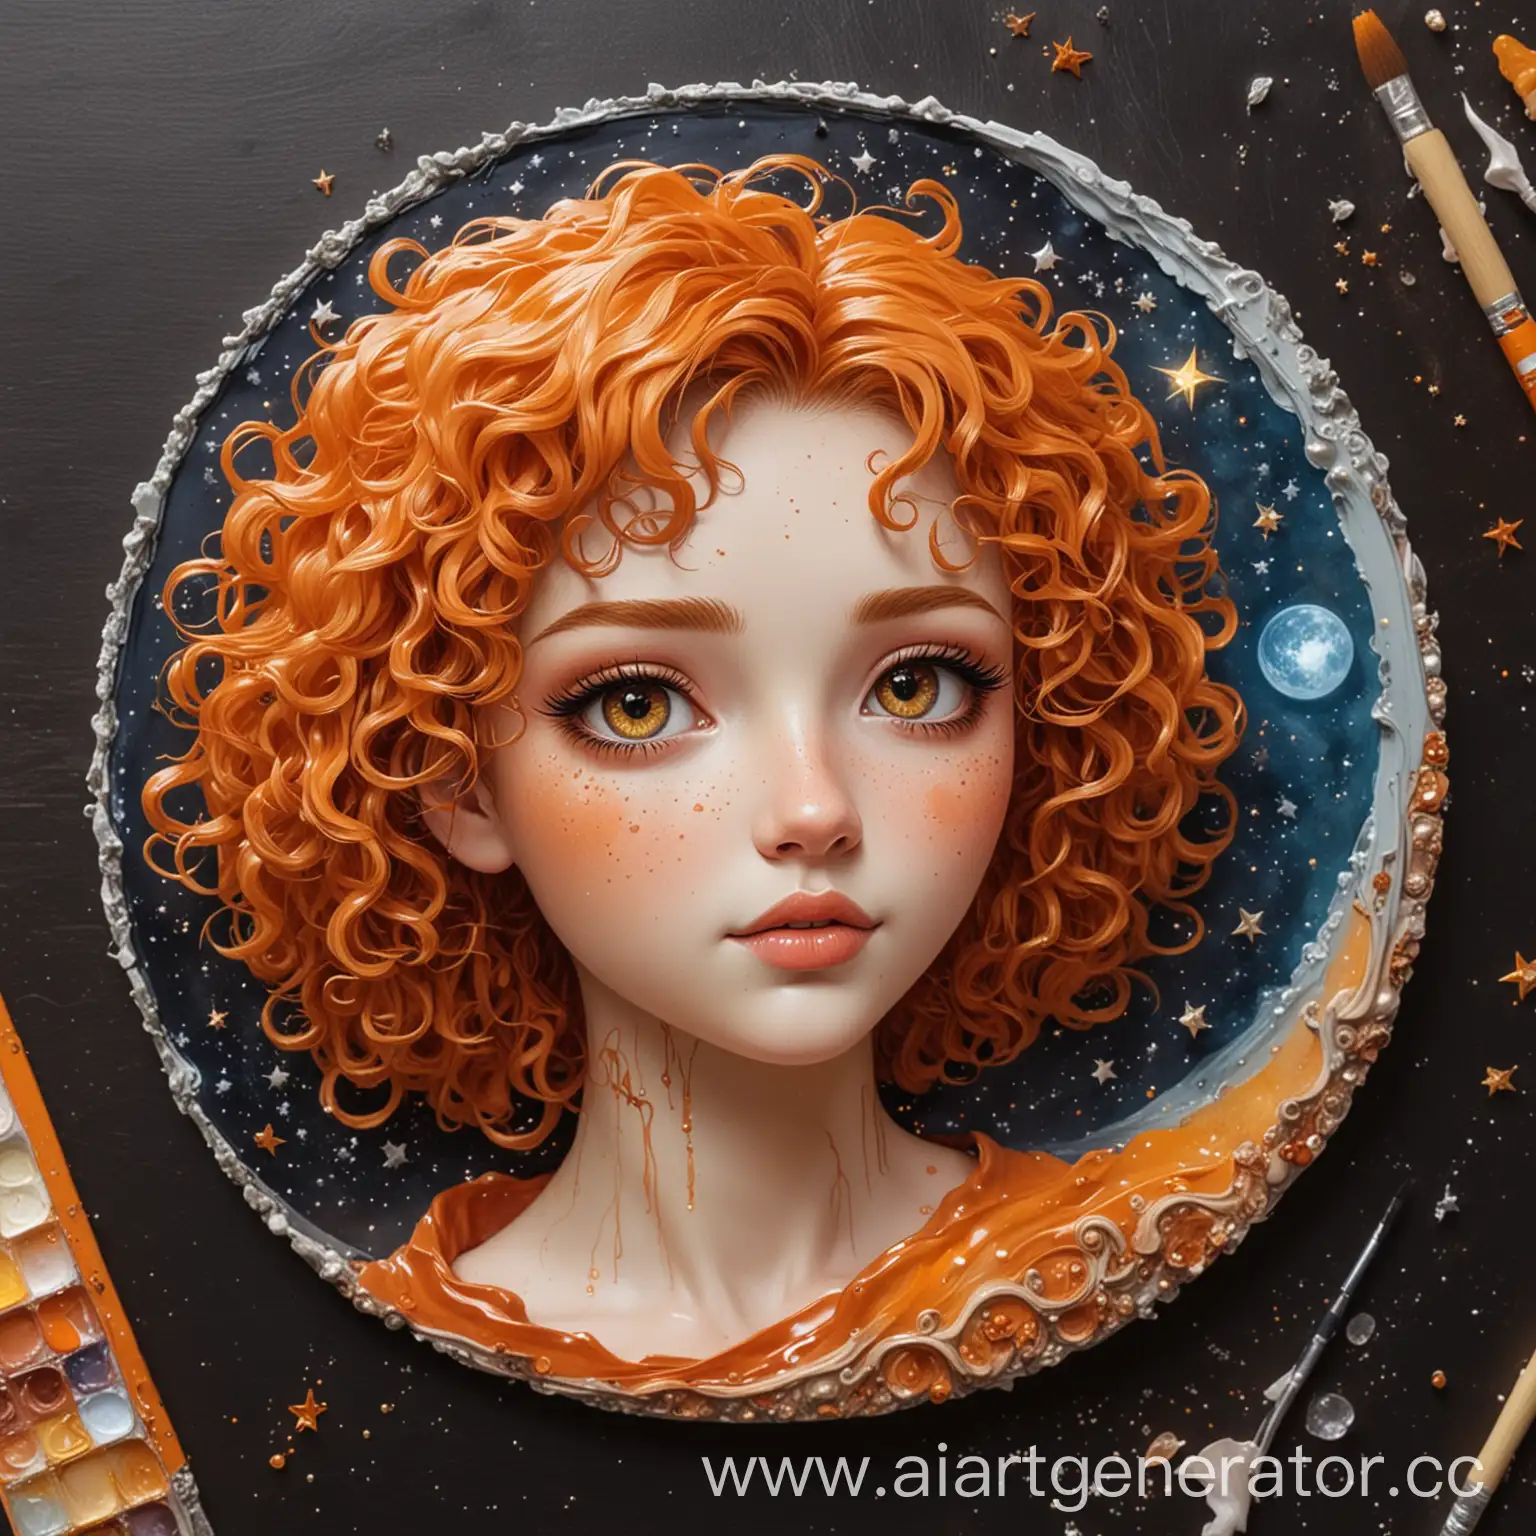 logo, hazel eye color, curly-haired woman with orange hair, along with a crystal moon, paints a picture with epoxy resin in a cartoon style